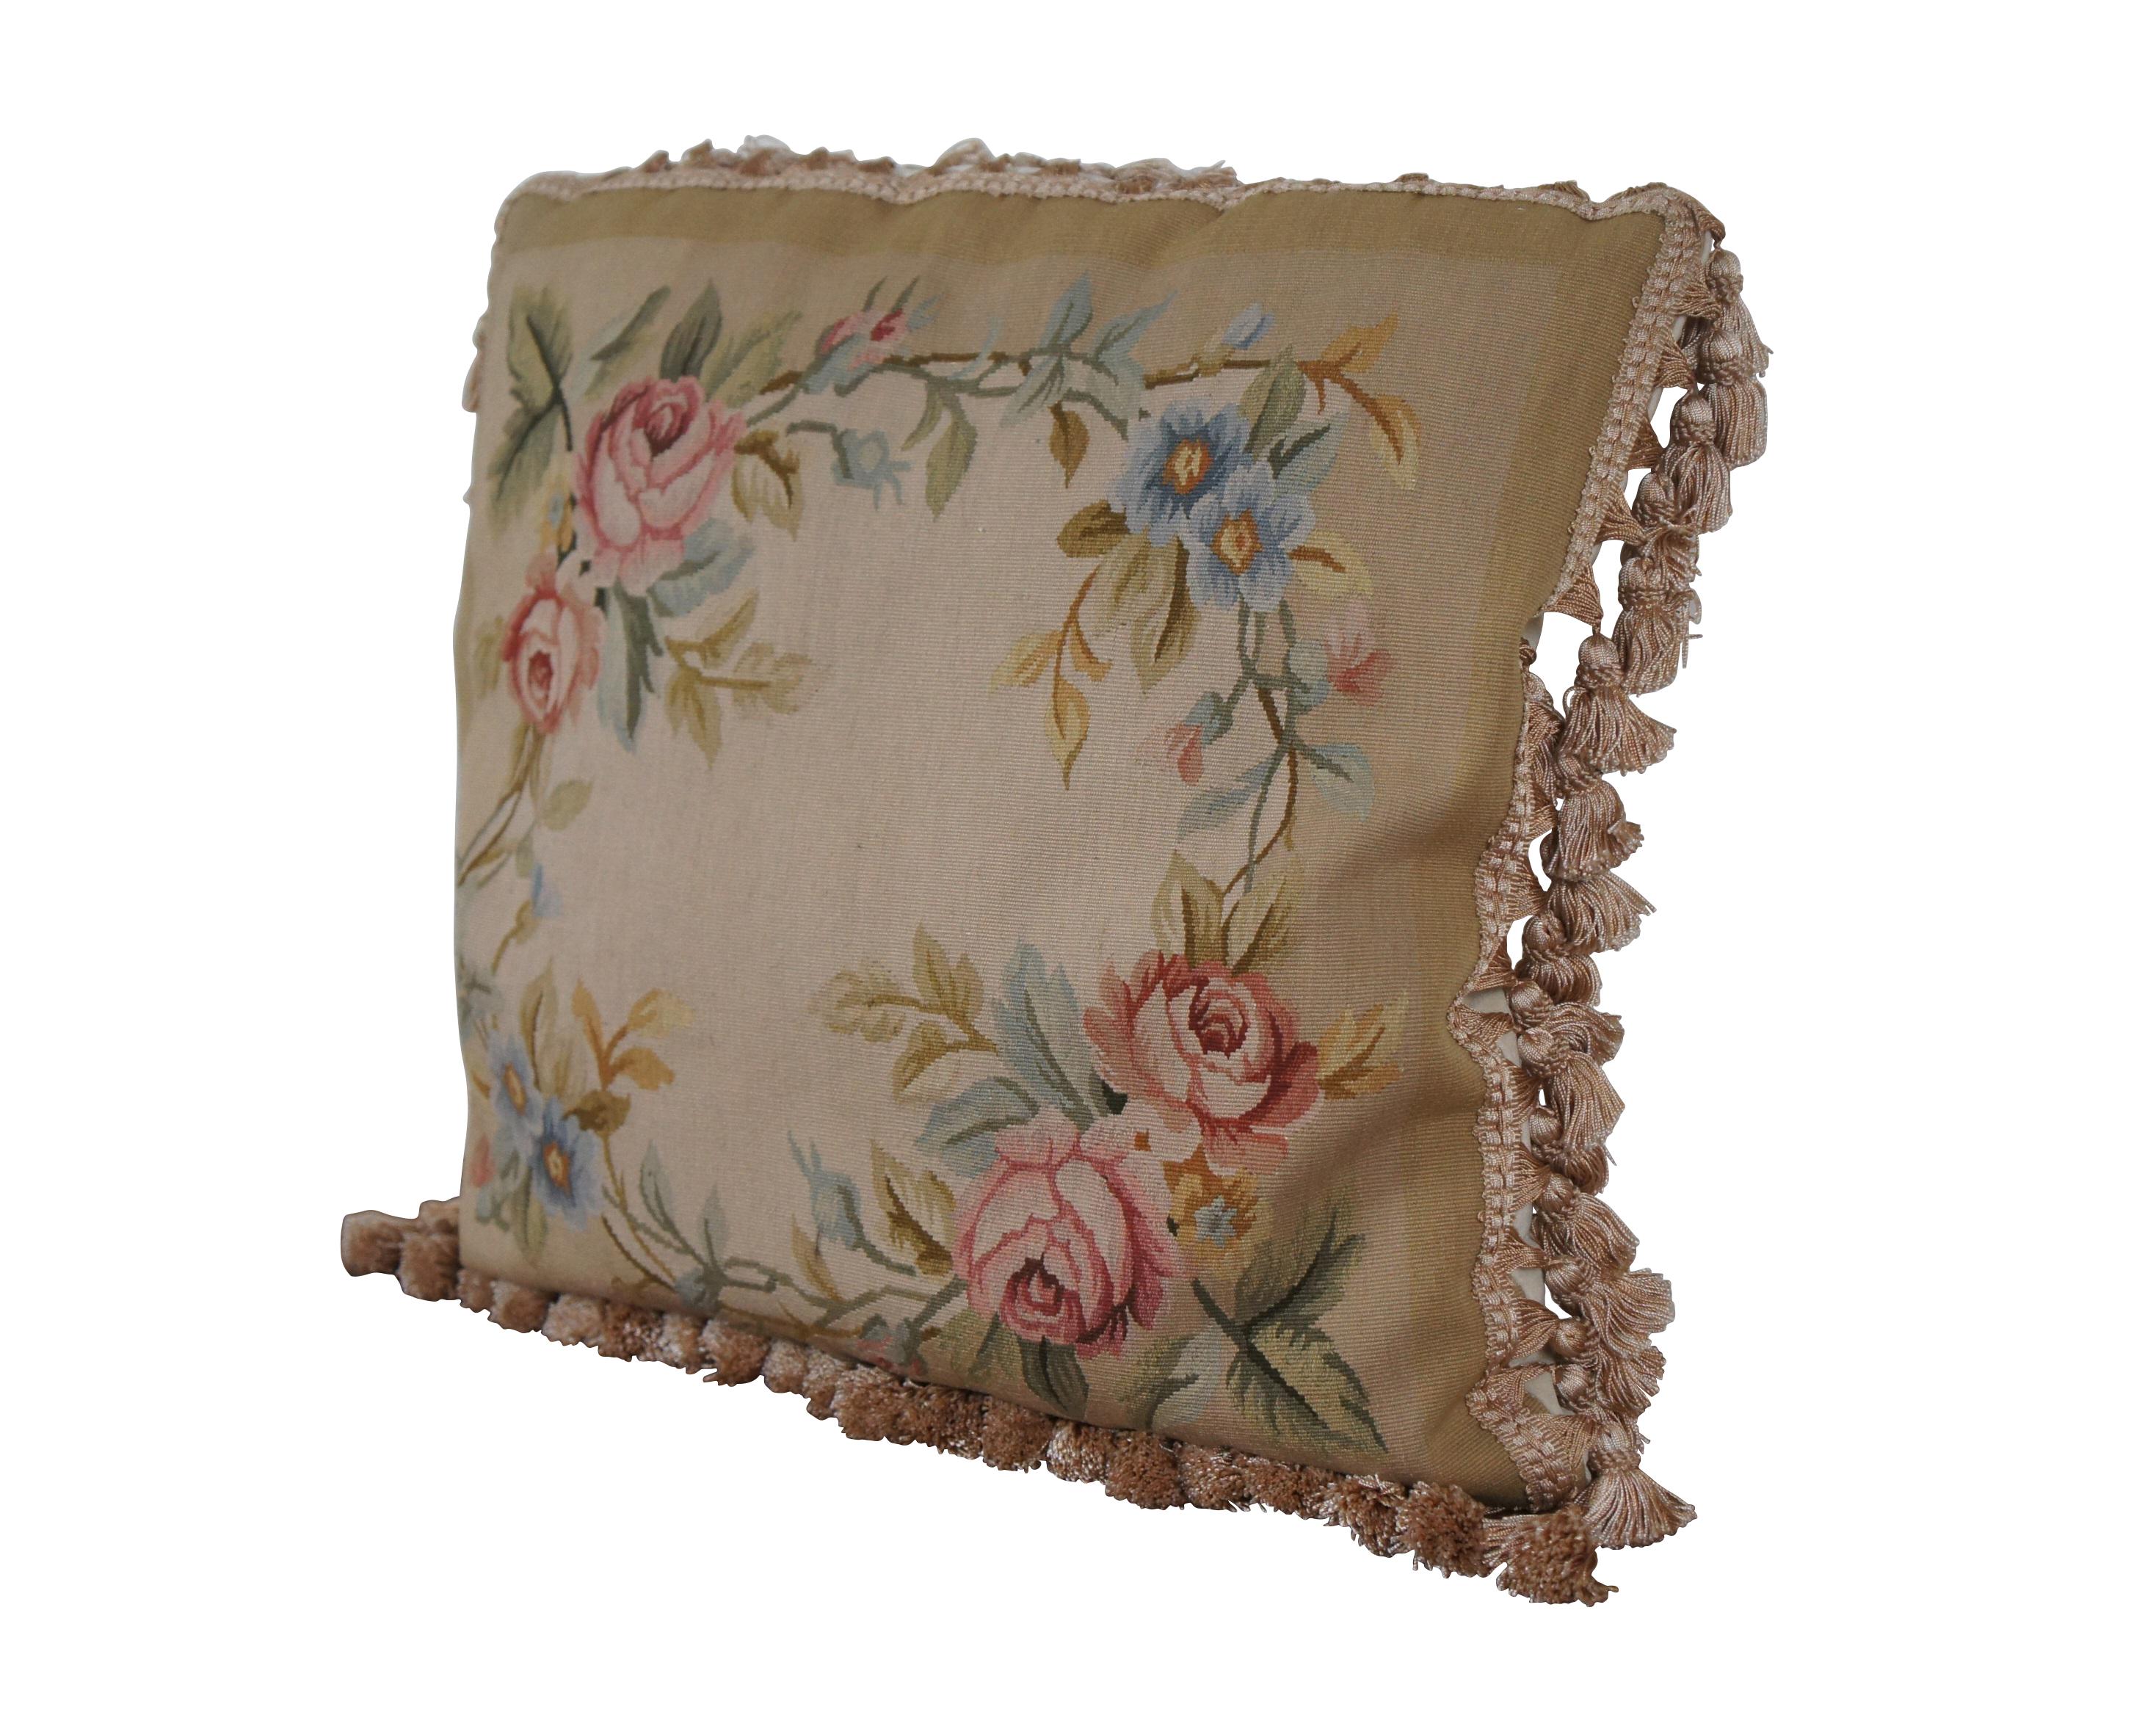 20th century French Aubusson style square throw pillow, embroidered in silk with a wreath of stems / branches sporting blue and yellow flowers and large pink roses on a two tone beige background. Cream velour back with zipper closure. Beige and